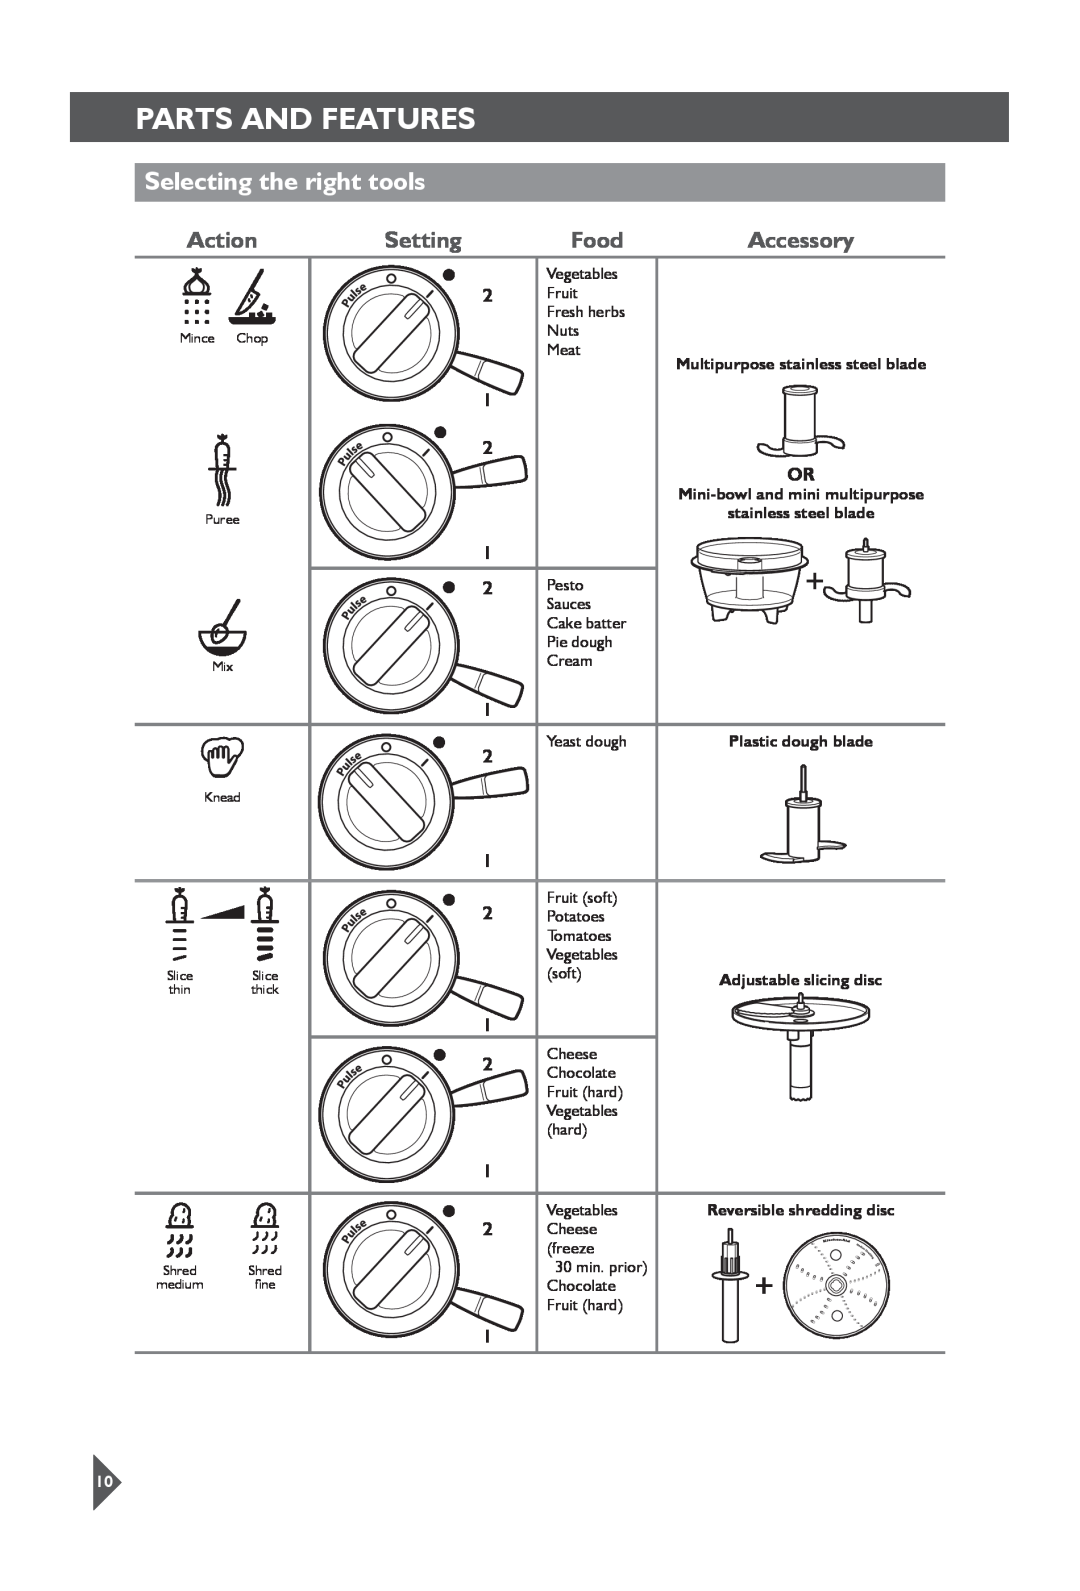 KitchenAid 5KFP1644 manual Selecting the right tools, Action, Setting, Food, Accessory, Parts and Features 